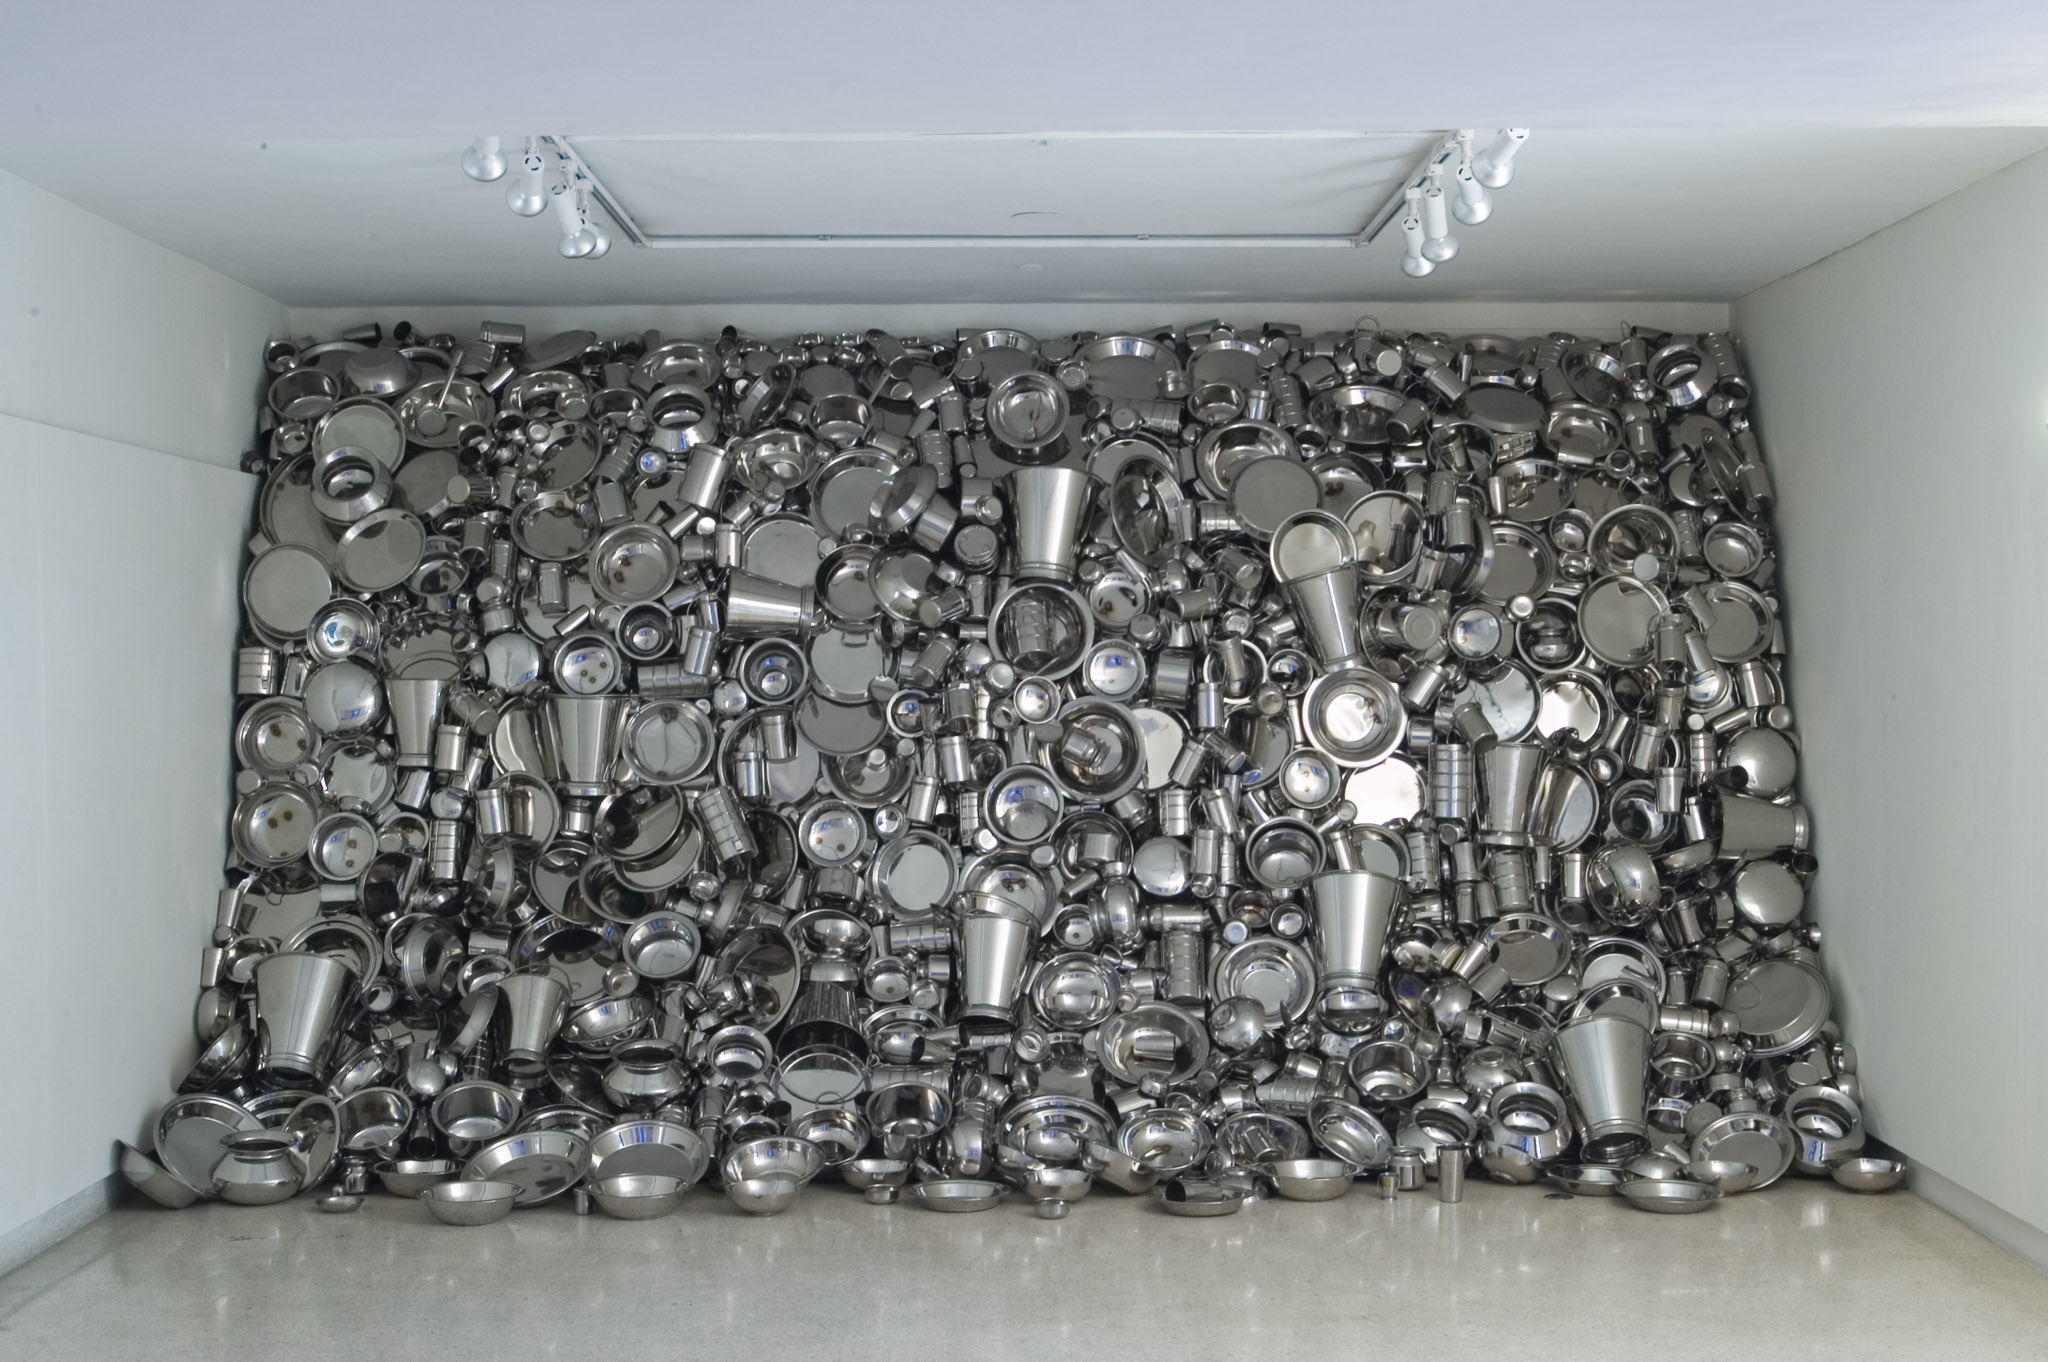 Installation art made of metal pots, pans, and containers occupying an entire wall.